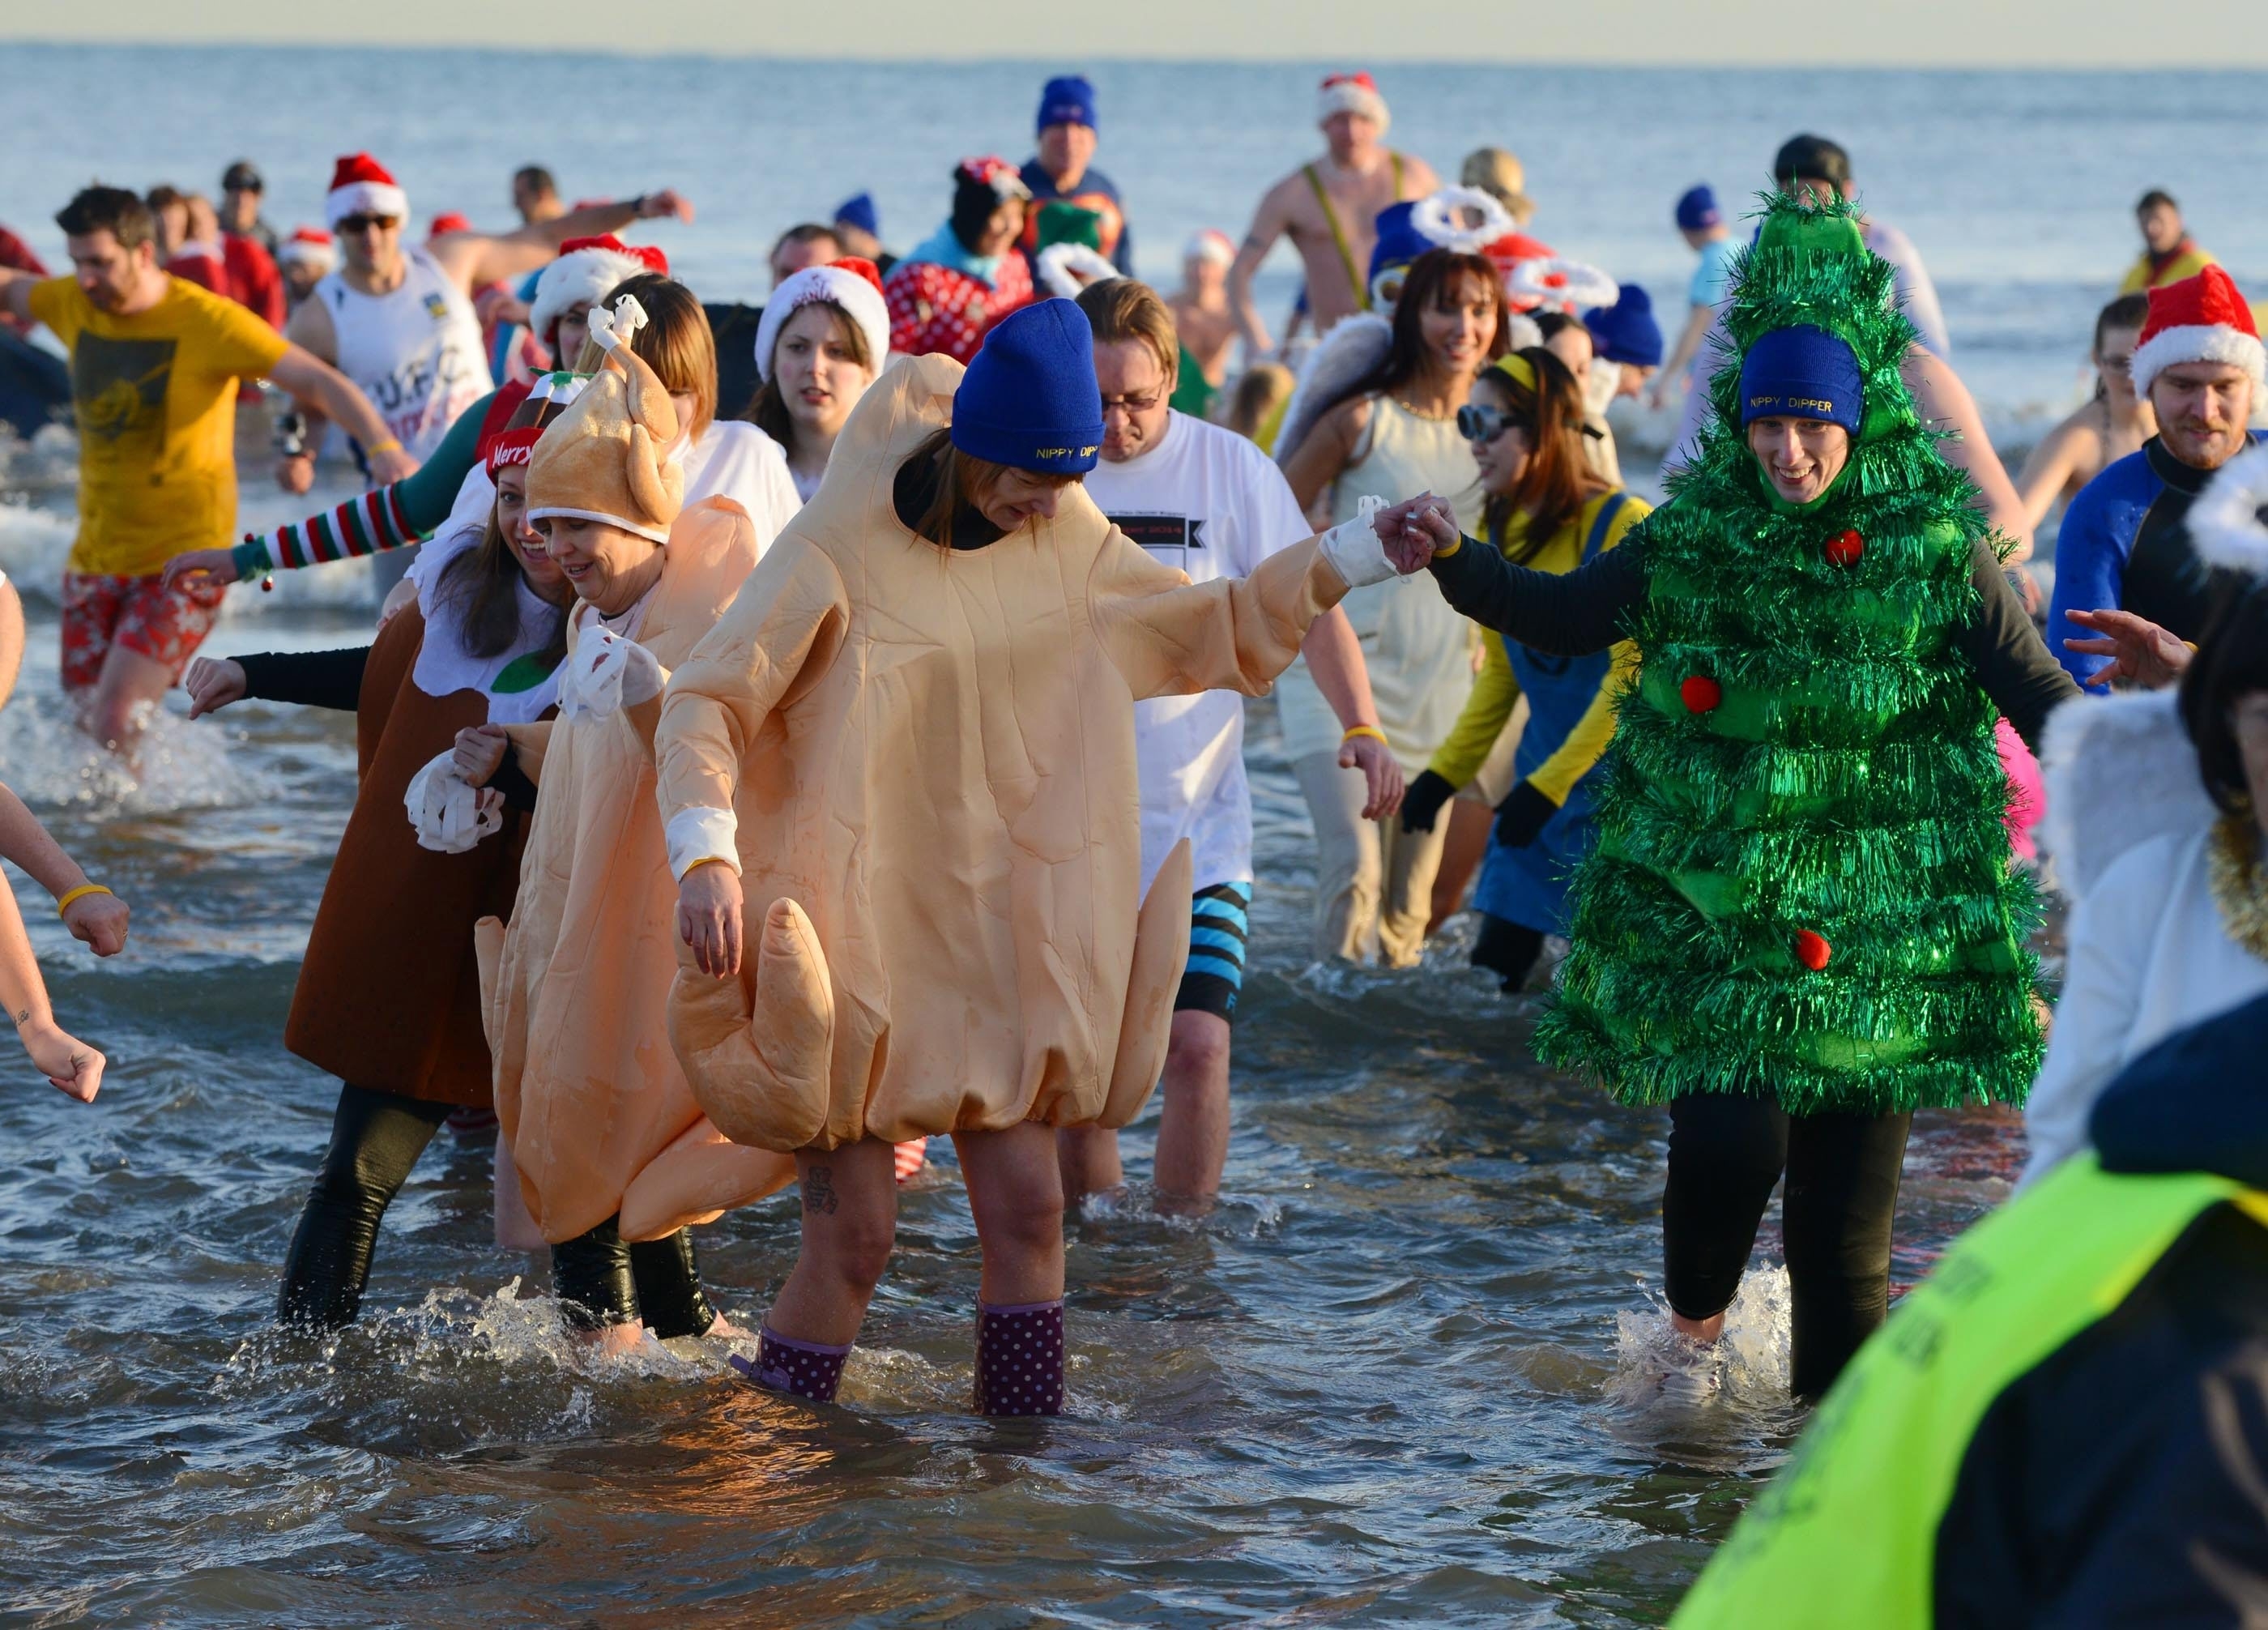 Nearly 300 brave swimmers take to the sea for a Boxing day Dip in Aberdeen this morning with the temperature at -2 degrees out of the water.
25/12/2014